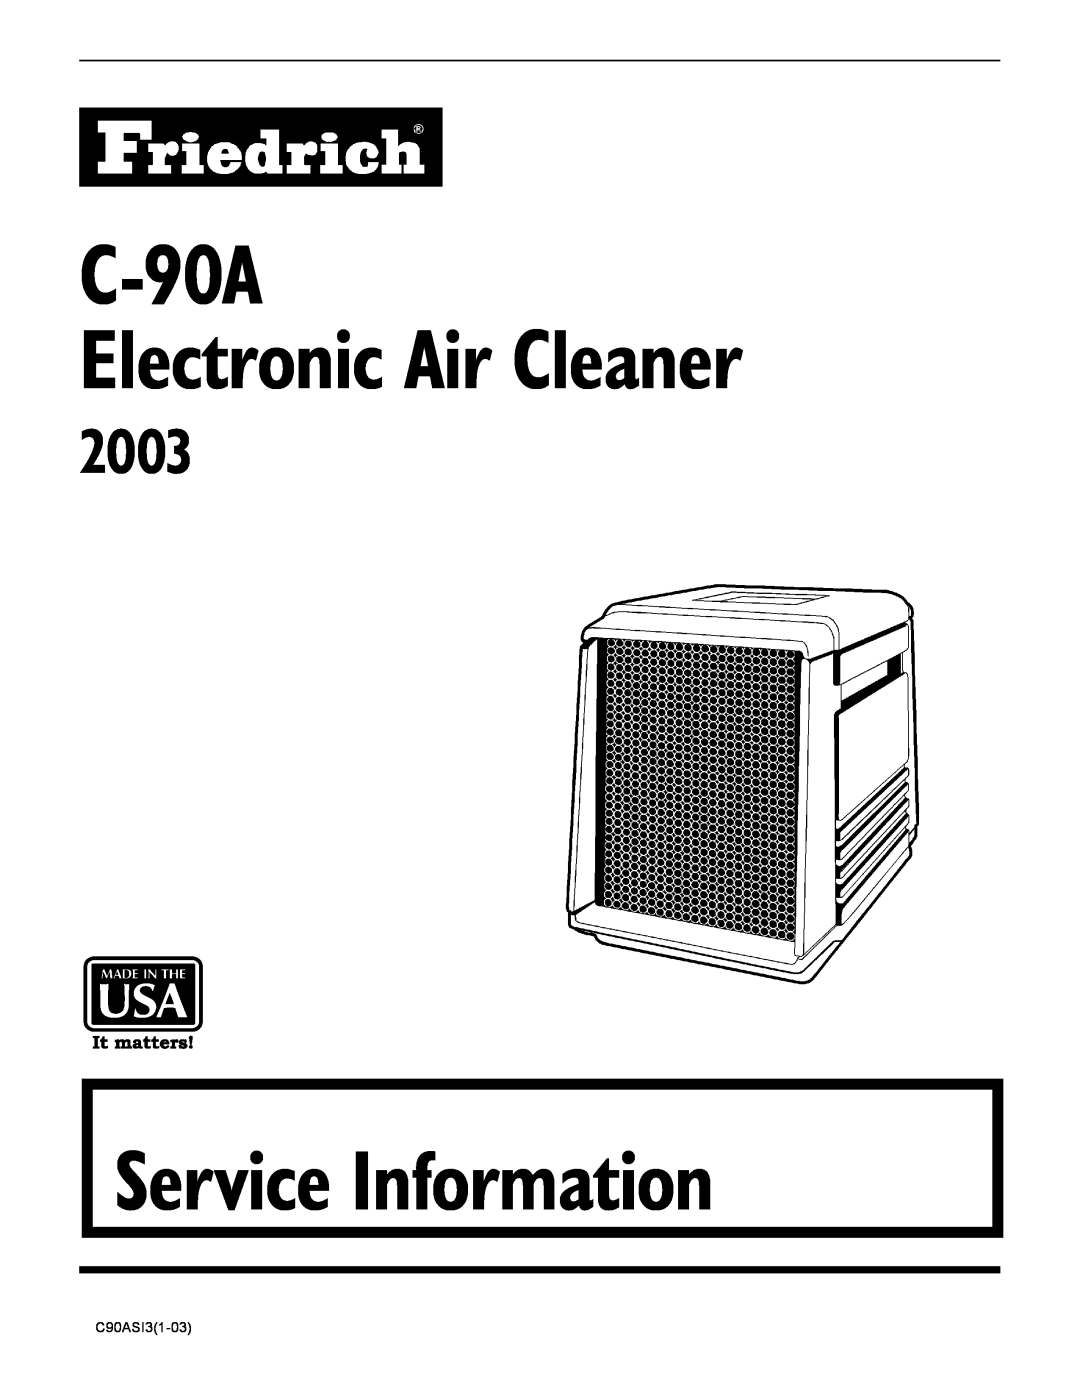 Friedrich manual 2003, C-90A Electronic Air Cleaner, Service Information, C90ASI31-03 